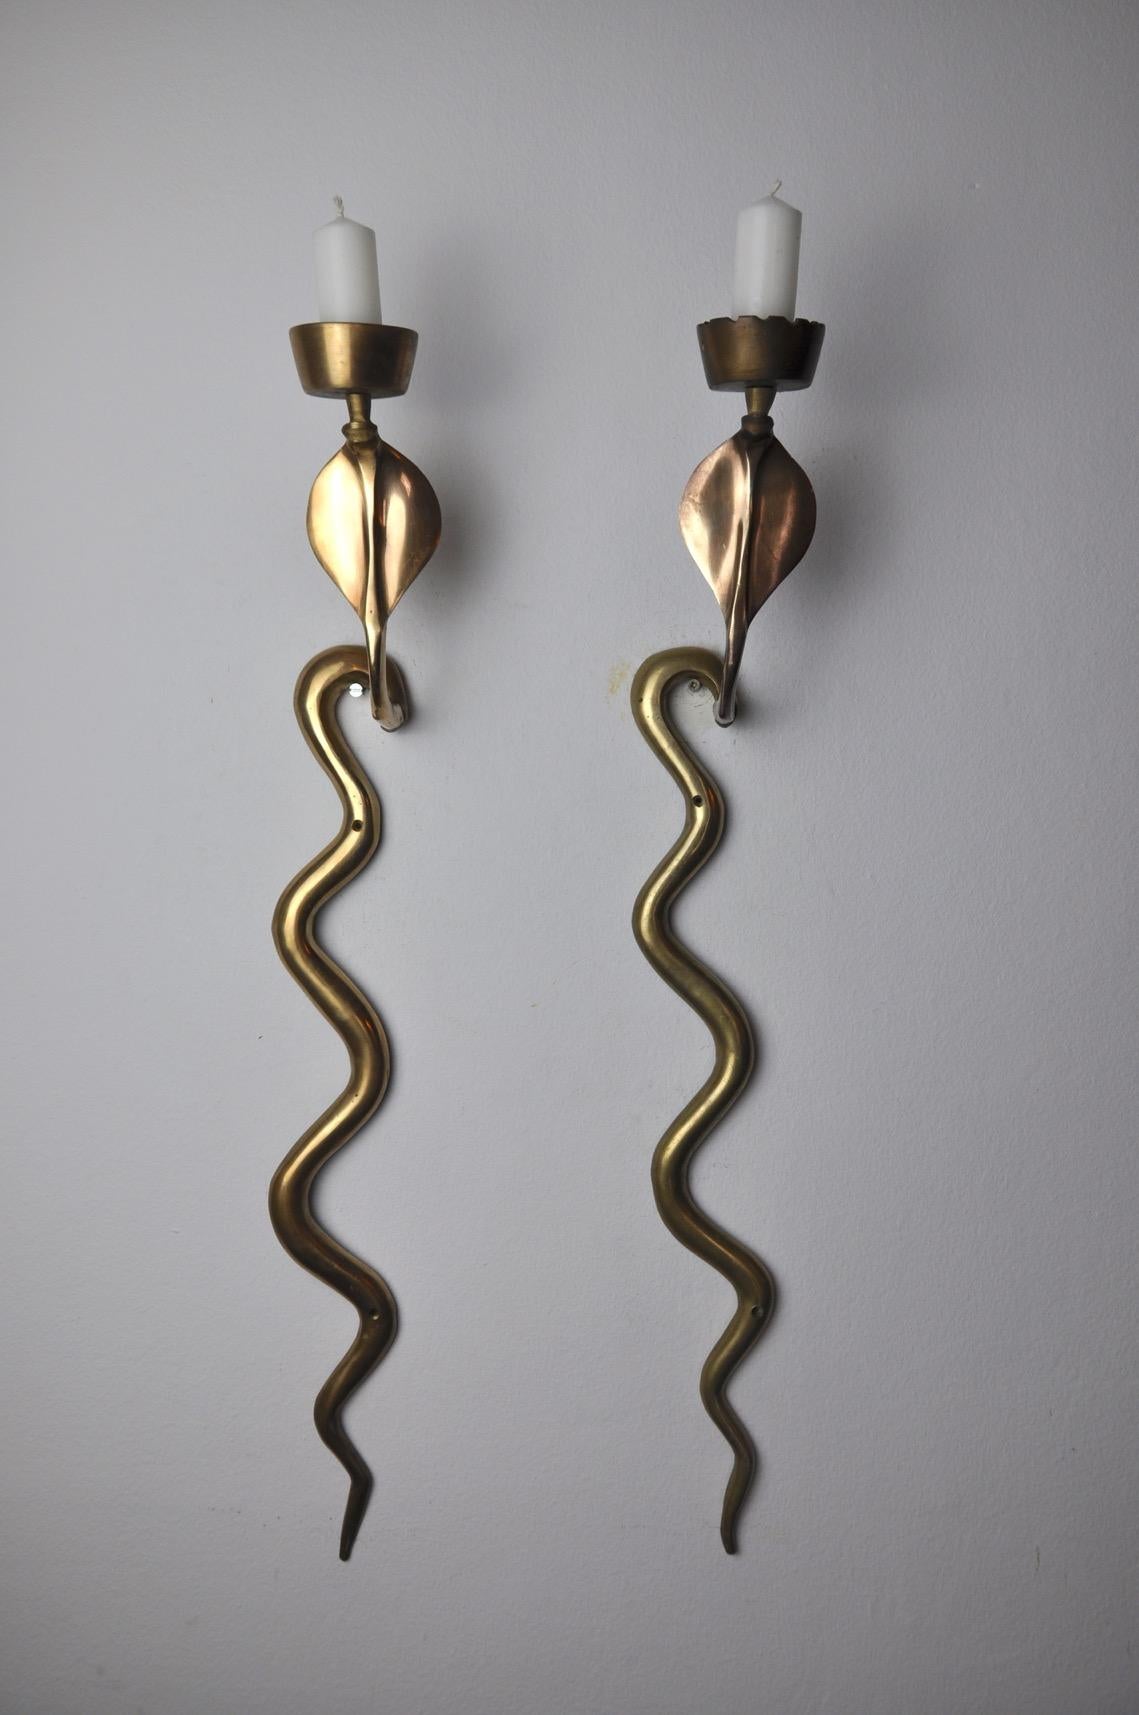 Very beautiful, large and rare pair of candlesticks in the shape of a snake designated and produced by Italo Valenti in the 1970s. Large golden brass structure, these two Brutalist candlesticks are a true work of art. Unique objects that will